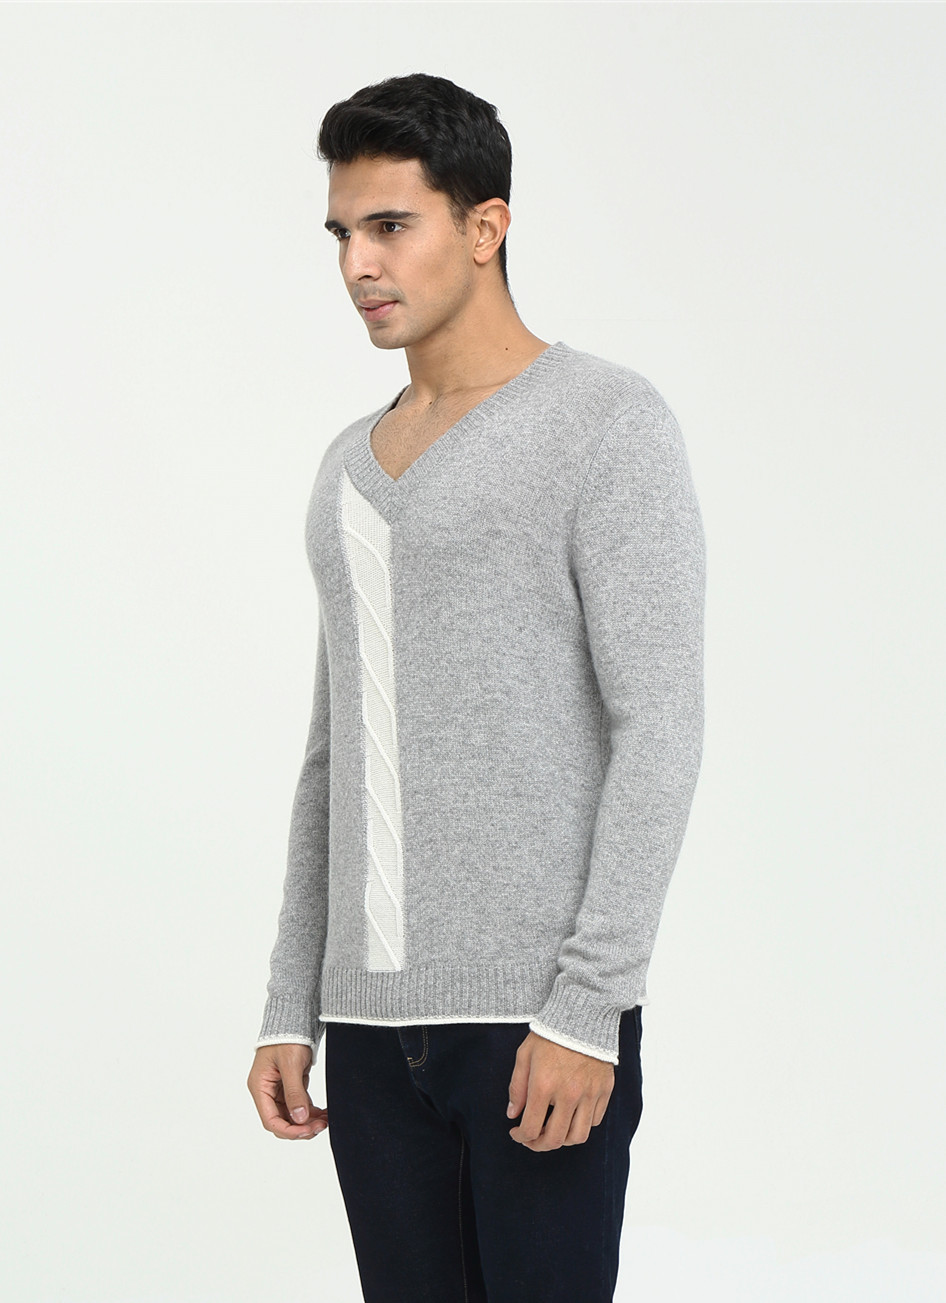 long sleeve 100% pure cashmere sweater for men